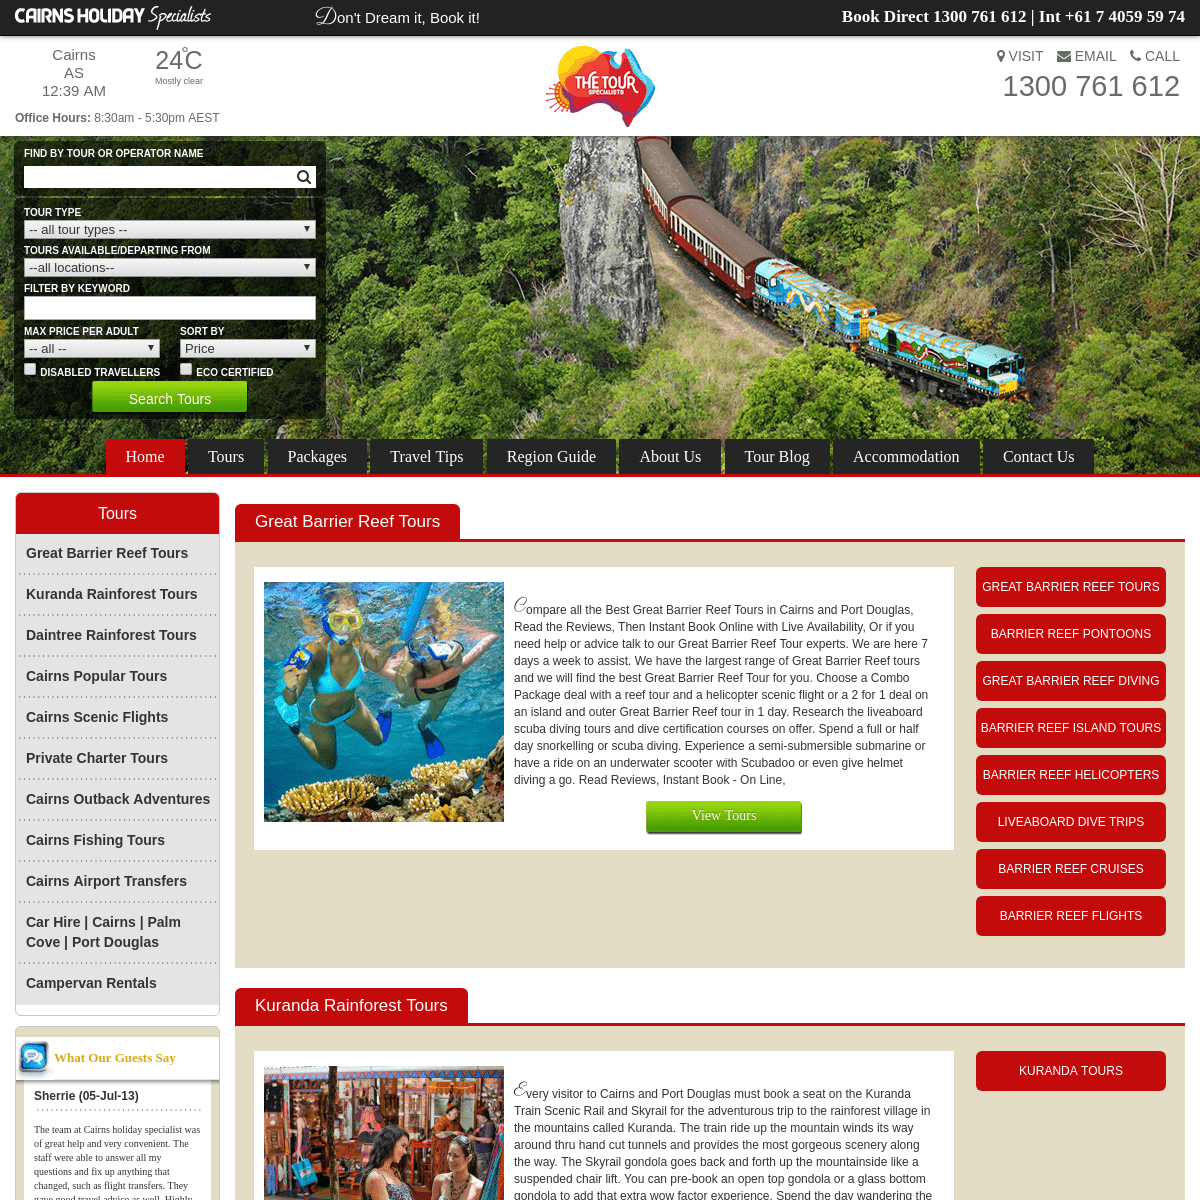 Cairns Tours | Port Douglas Attractions | Great Barrier Reef Tours | New Deals Daily